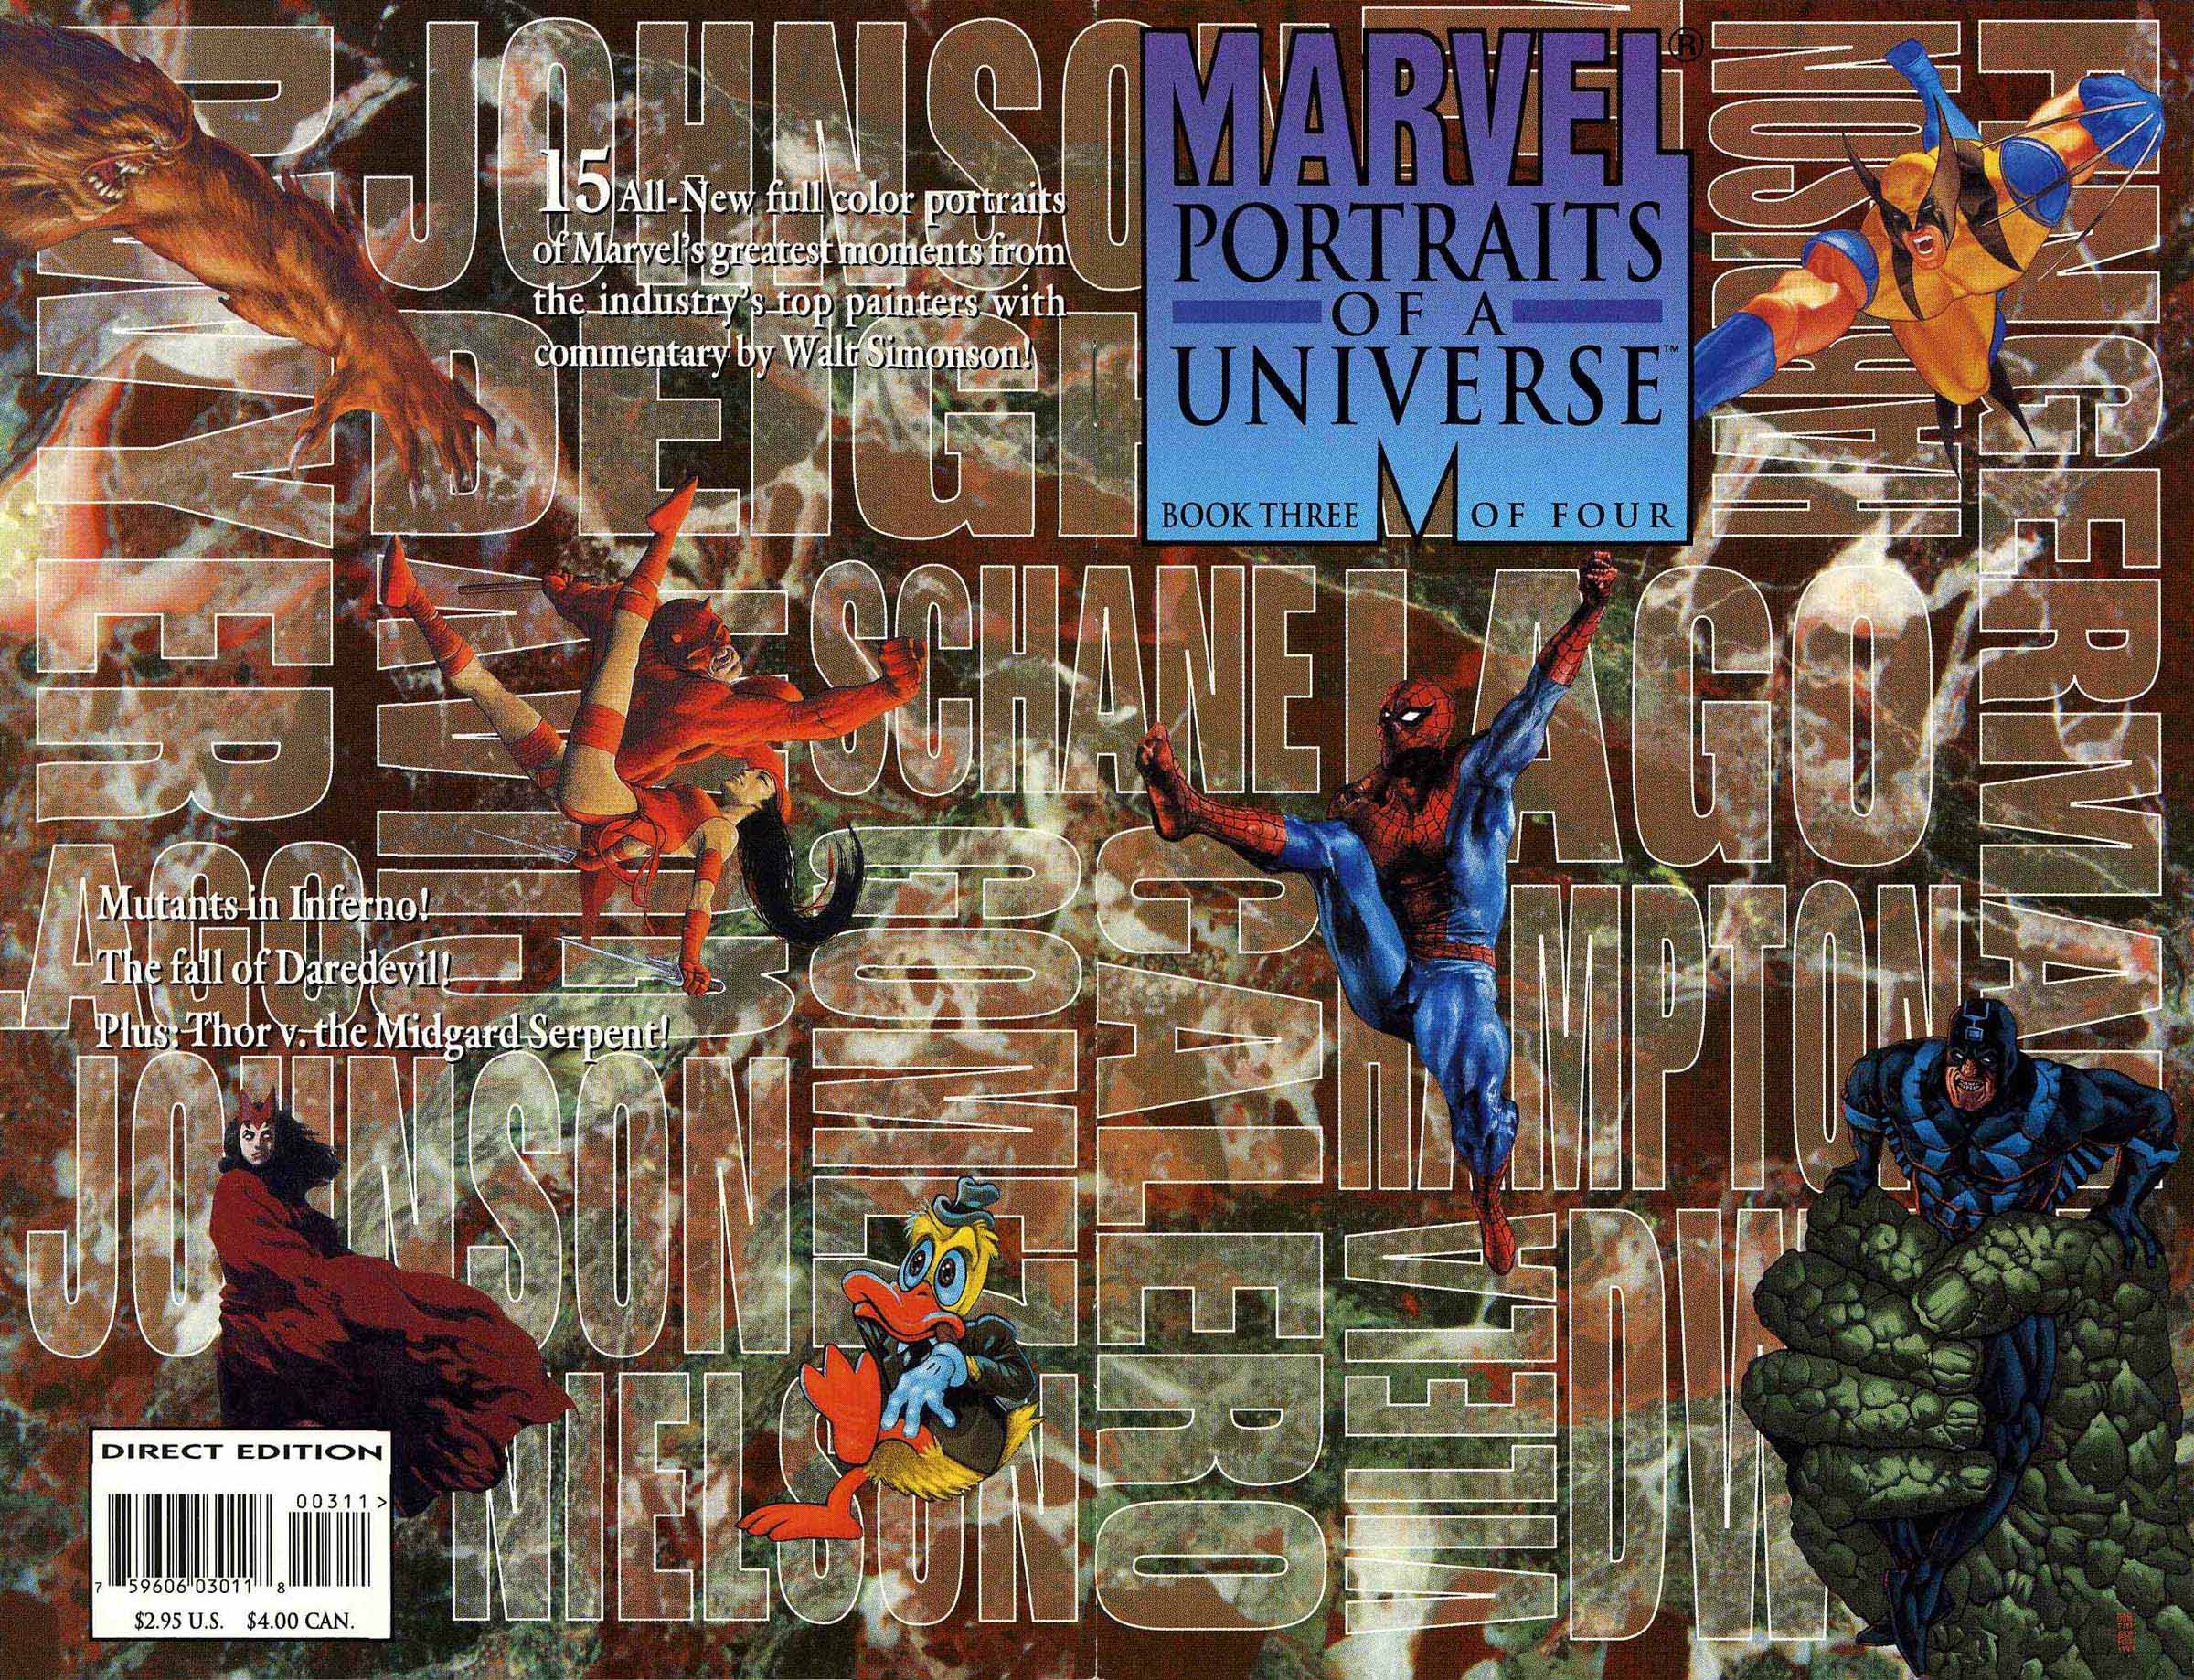 Read online Marvels: Portraits comic -  Issue #3 - 1